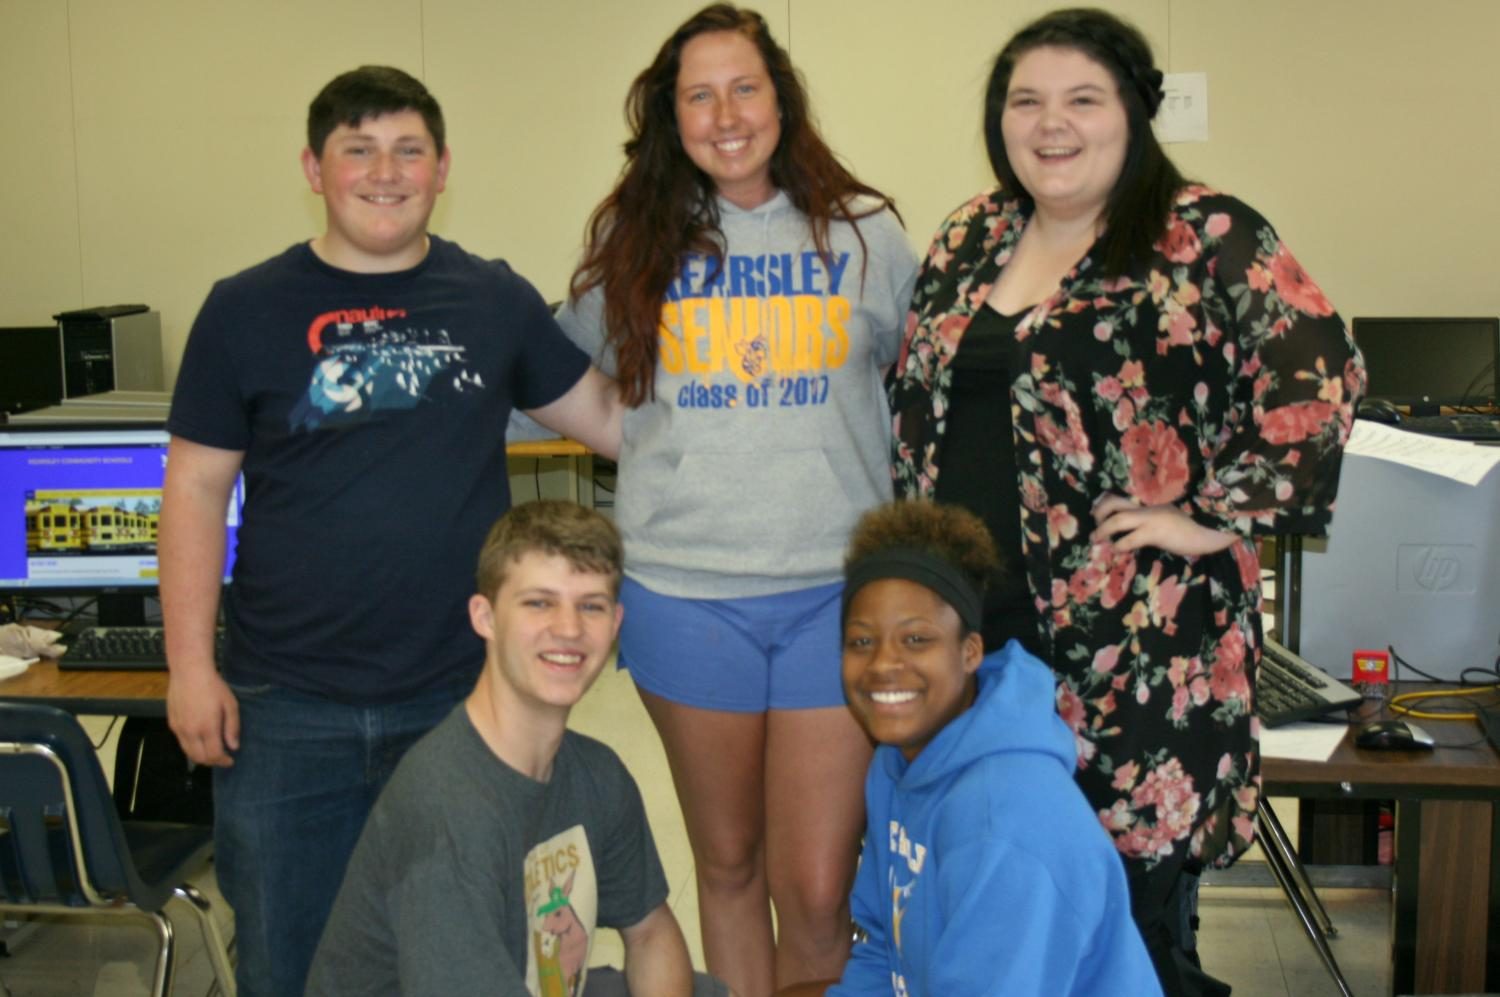 The 2016-17 seniors on the  staff of The Eclipse are Andrew Flynn (back row, l to r), Haylie Brooks, Katelyn Elumbaugh, Ryan Thomas (front row, l to r), and Aver McKay.